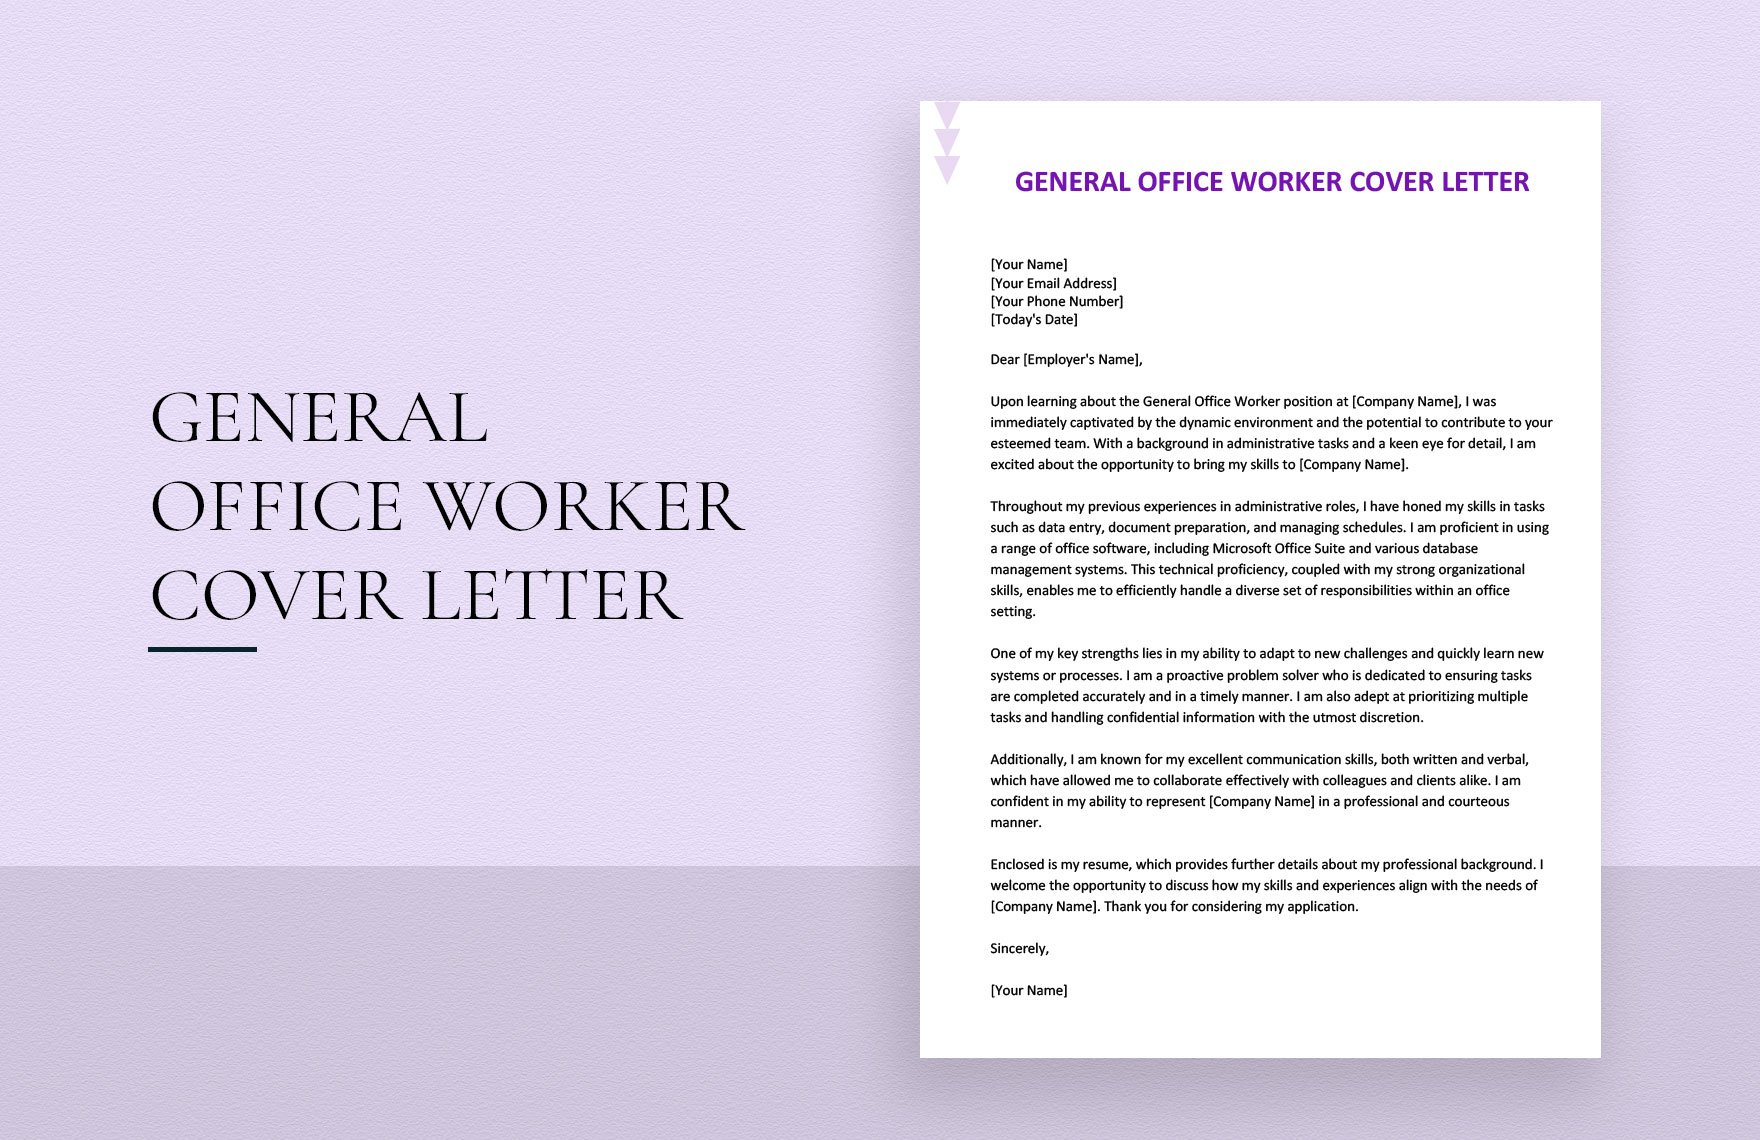 General Office Worker Cover Letter